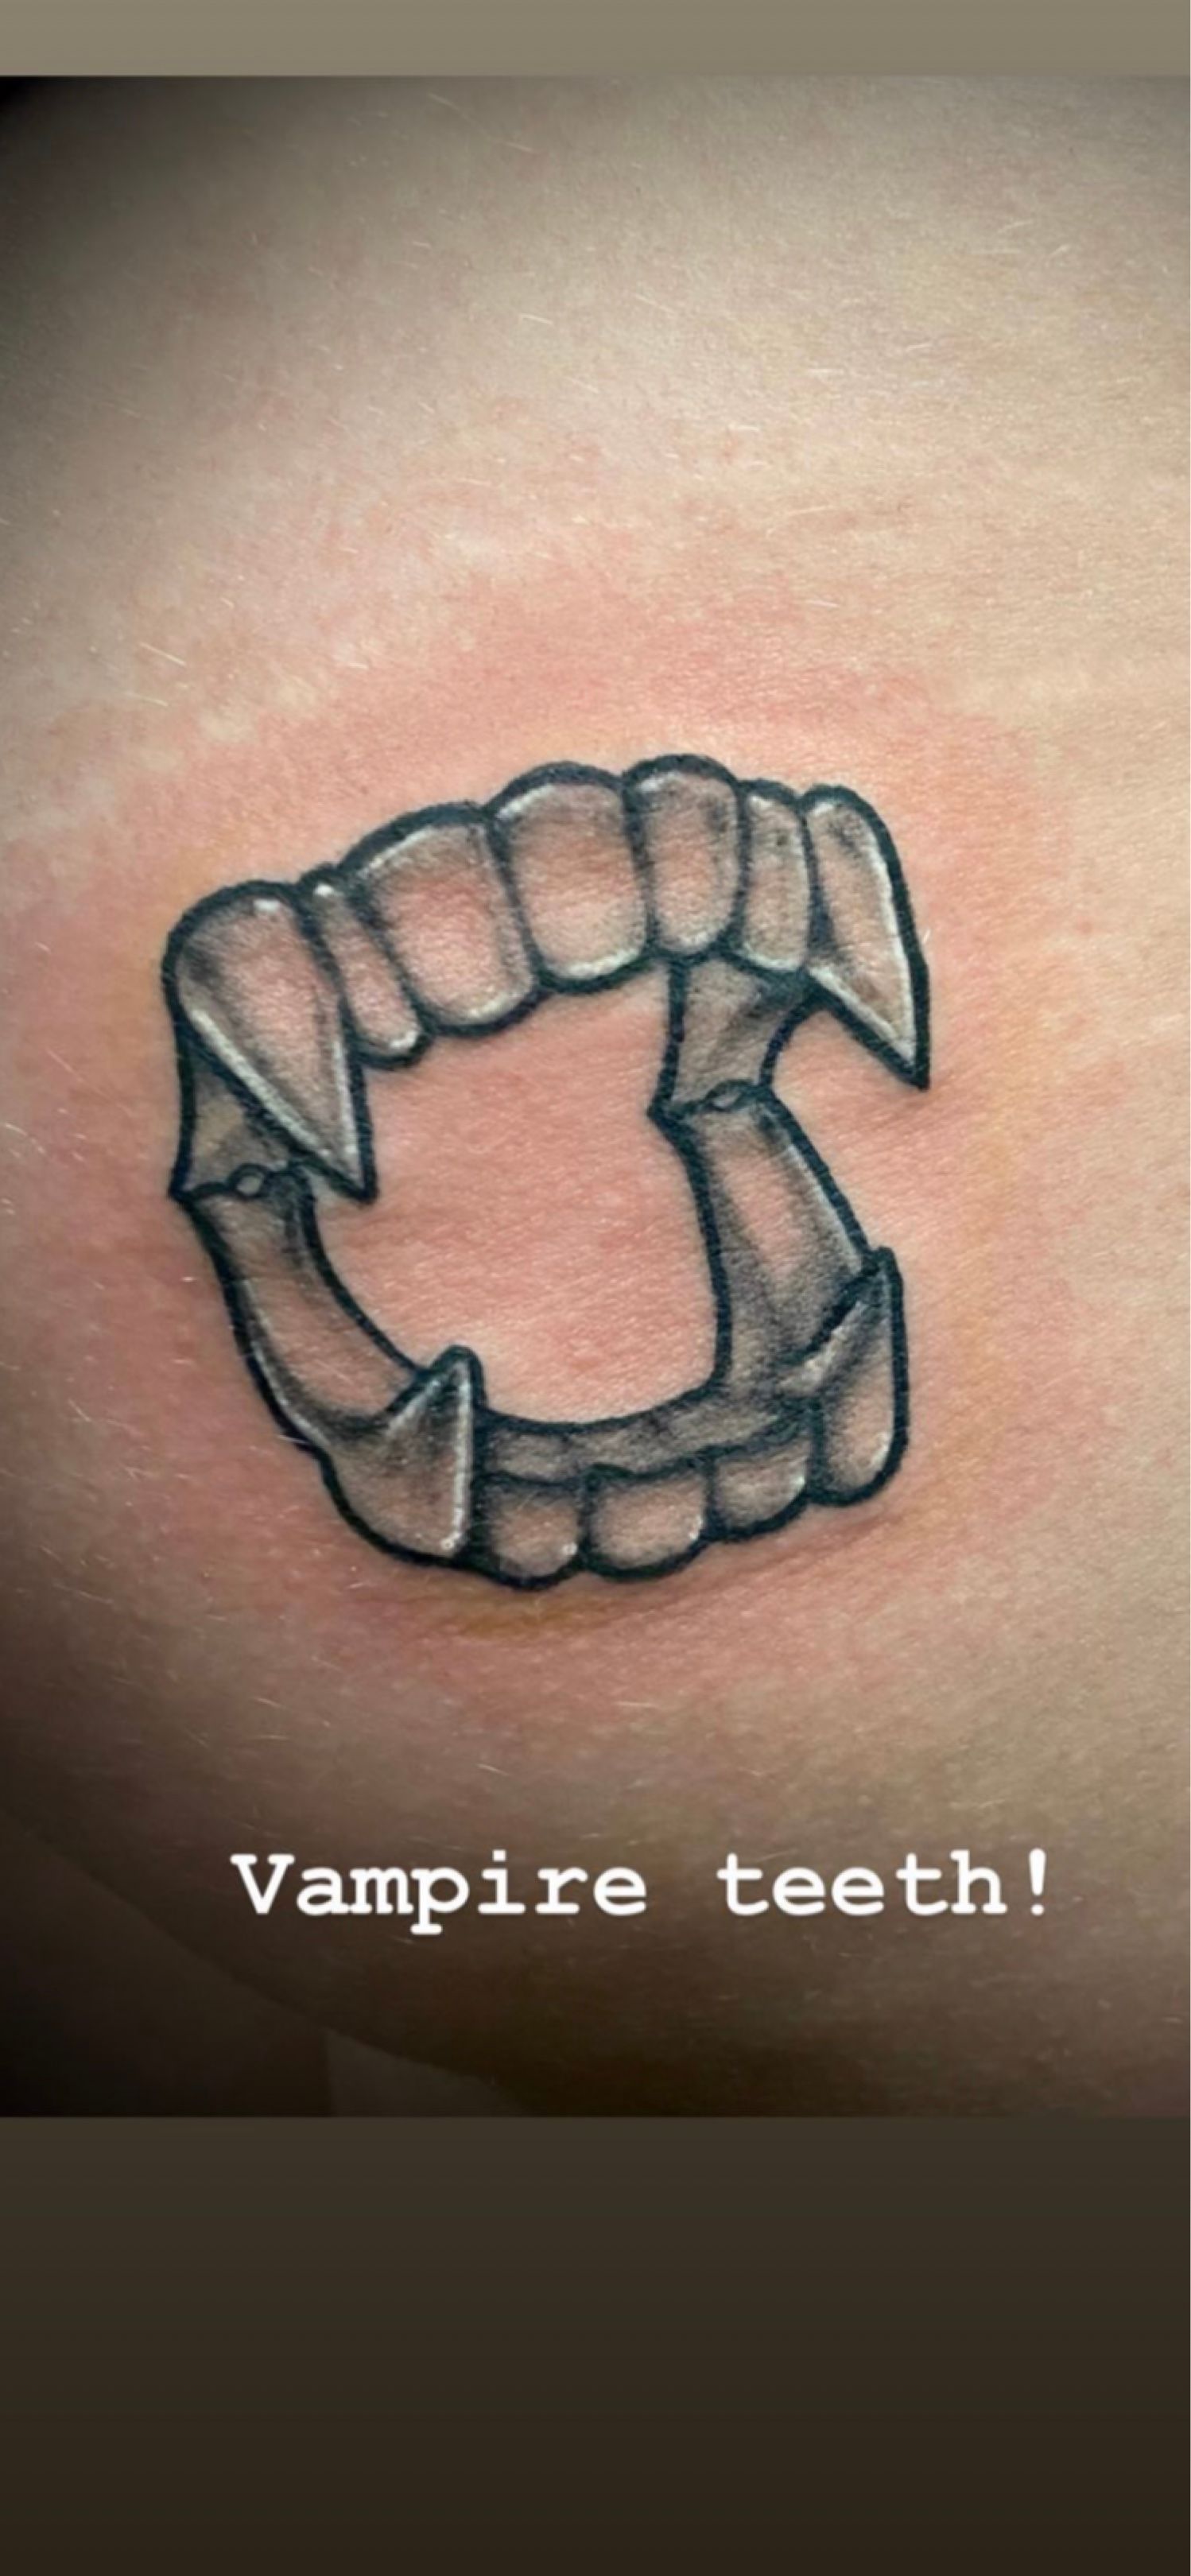 Cracker Joes Tattoo on Twitter Finally got to tattoo these vampire teeth  leftover tlfrom the Spin to Win special Happy Friday tattoos ink  tattooartist cttattoo nytattoo goodtattoos tattoooftheday  vampiretattoo vampire inked tattooed